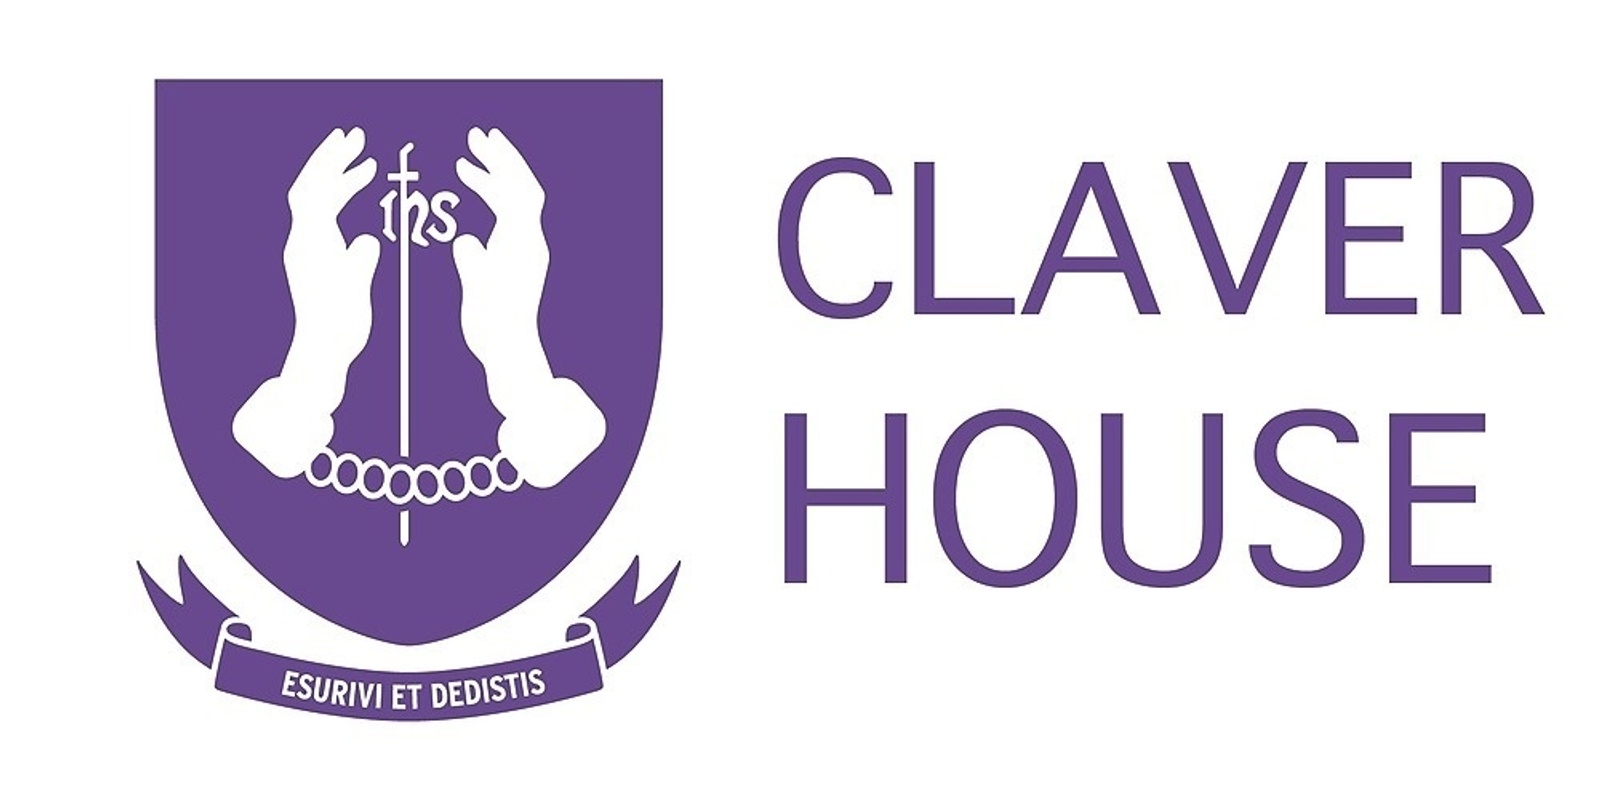 Claver House Mass and Supper